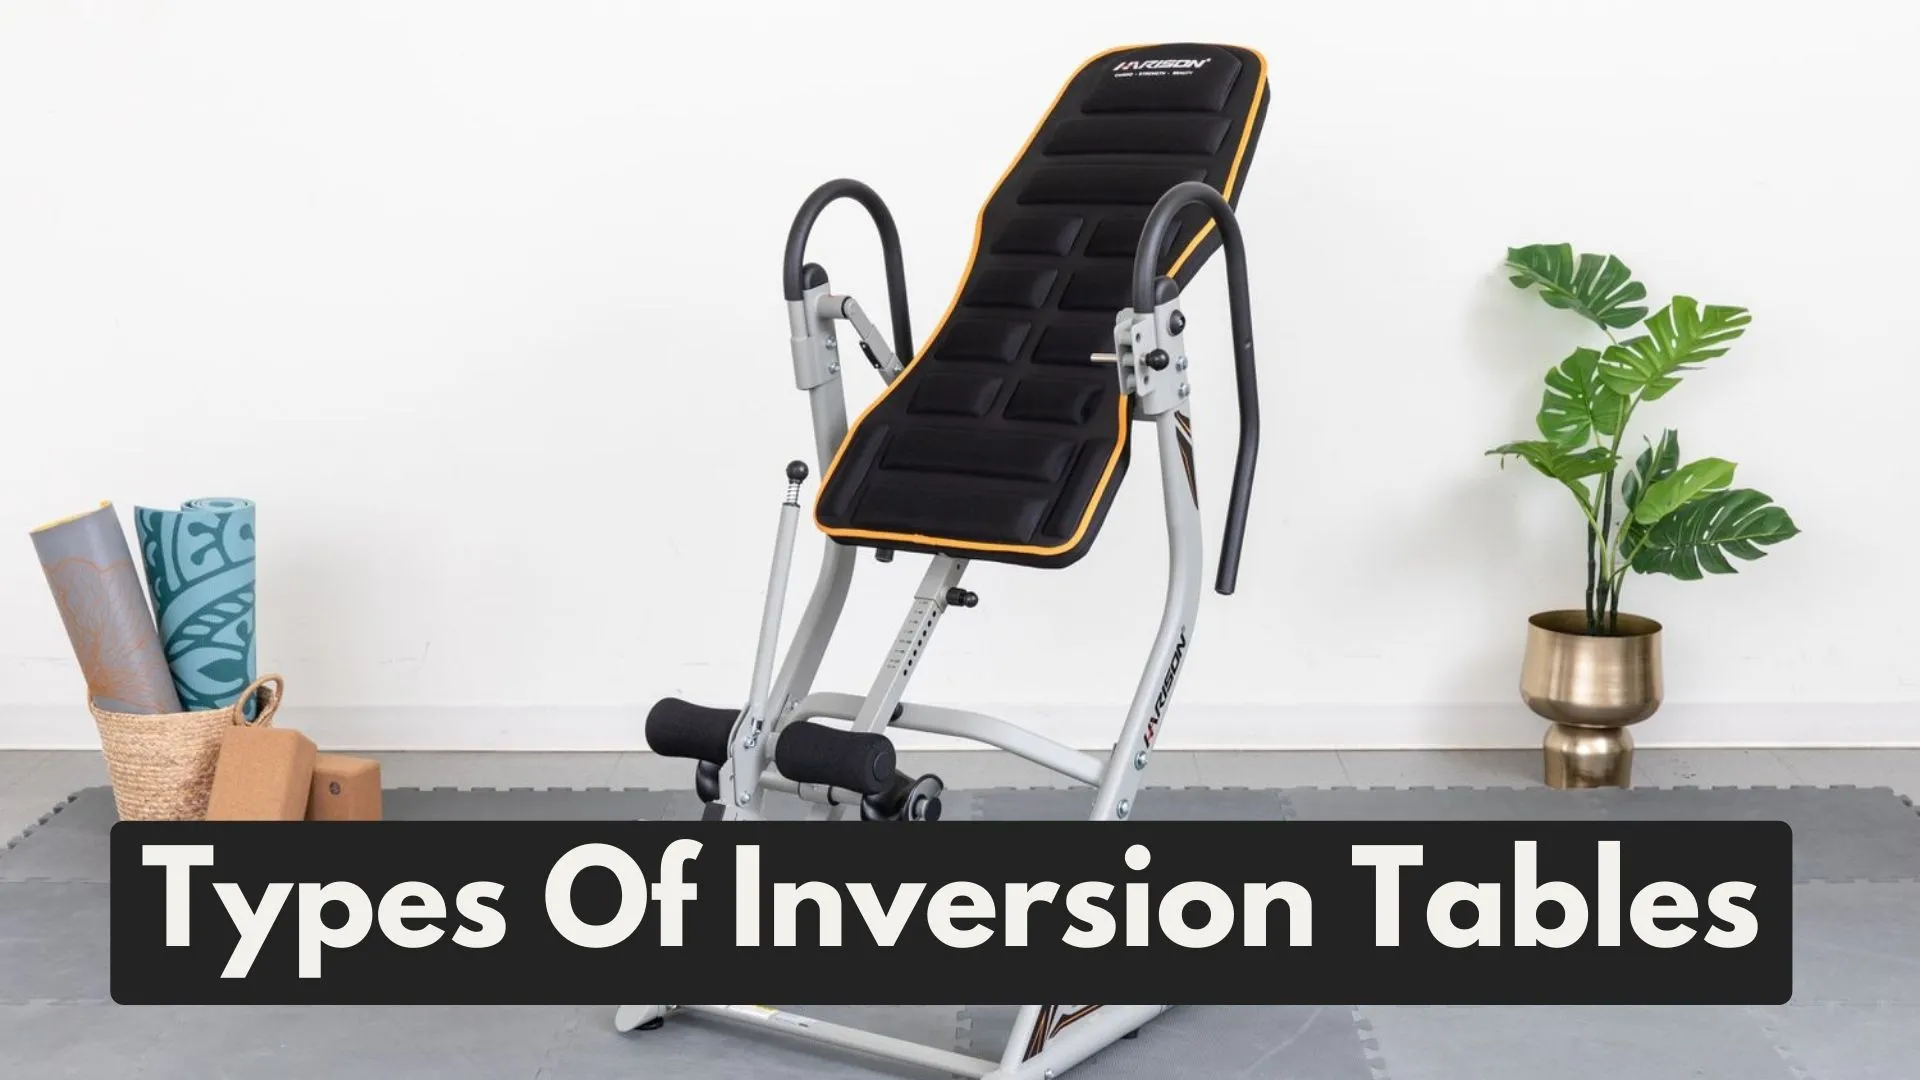 Types of Inversion Tables - Which One To Choose? b Inversiontablehub.com inversion table hub